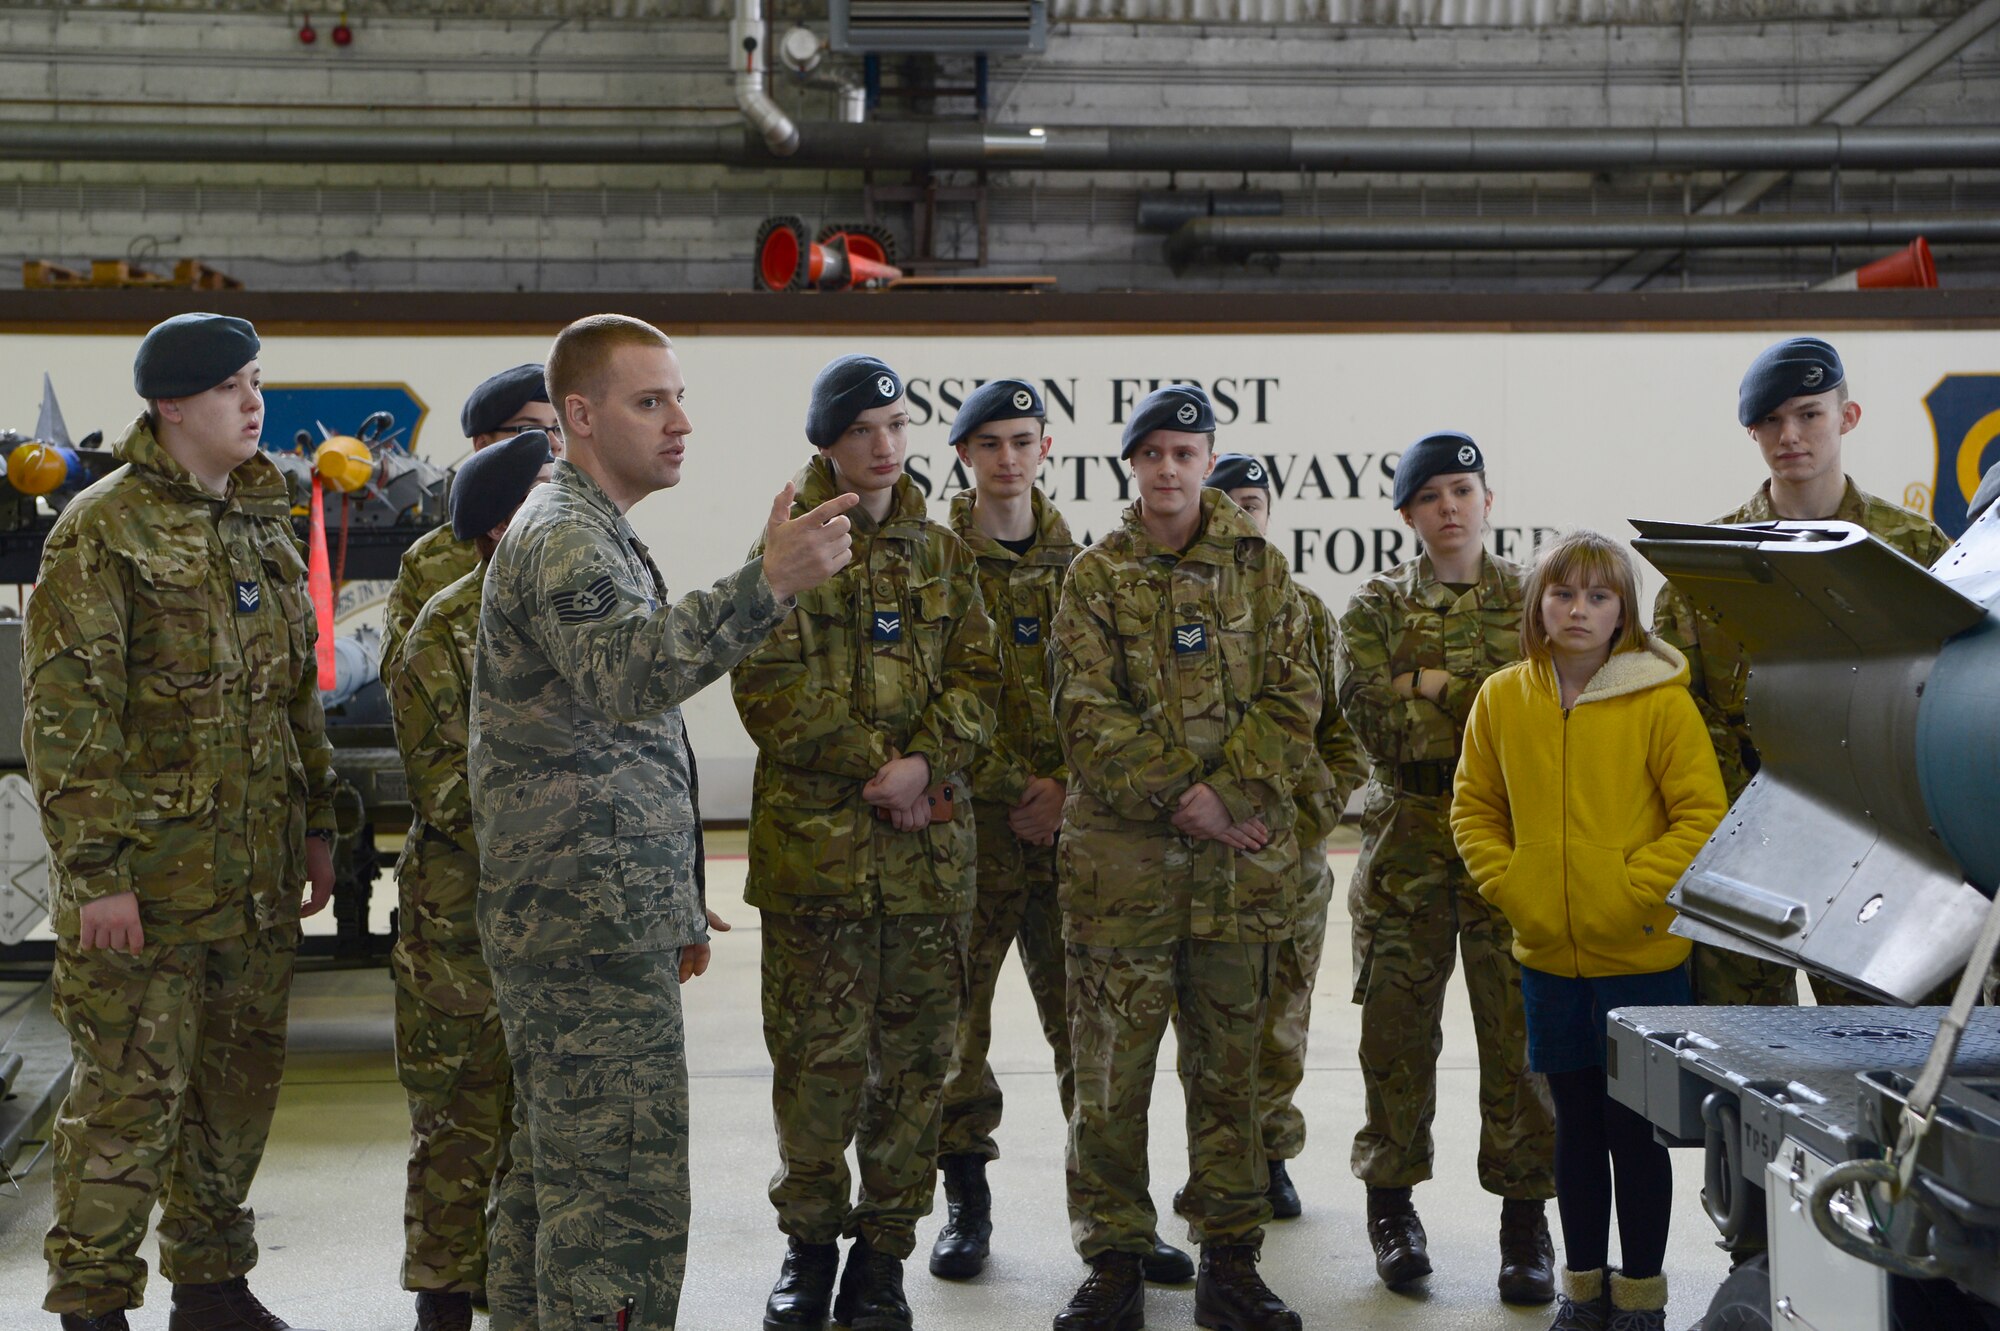 The cadets visited several different squadrons on base to give them a glimpse into U.S. Air Force operations.